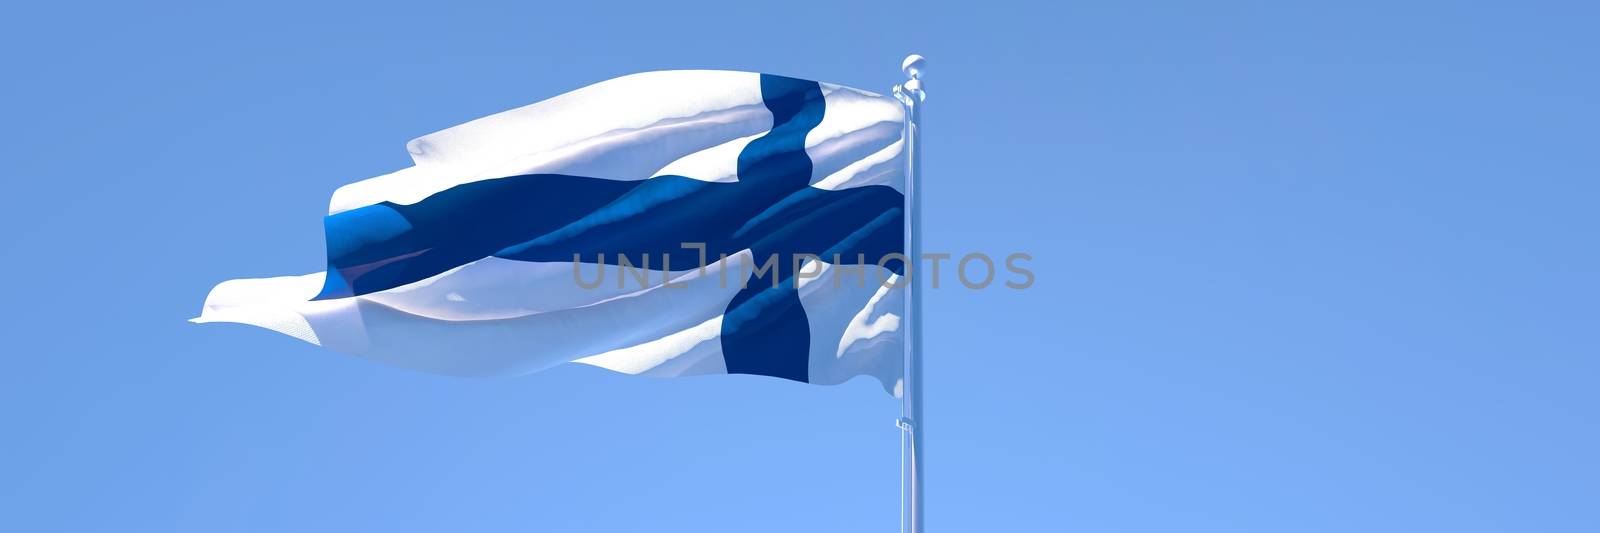 3D rendering of the national flag of Finland waving in the wind against a blue sky